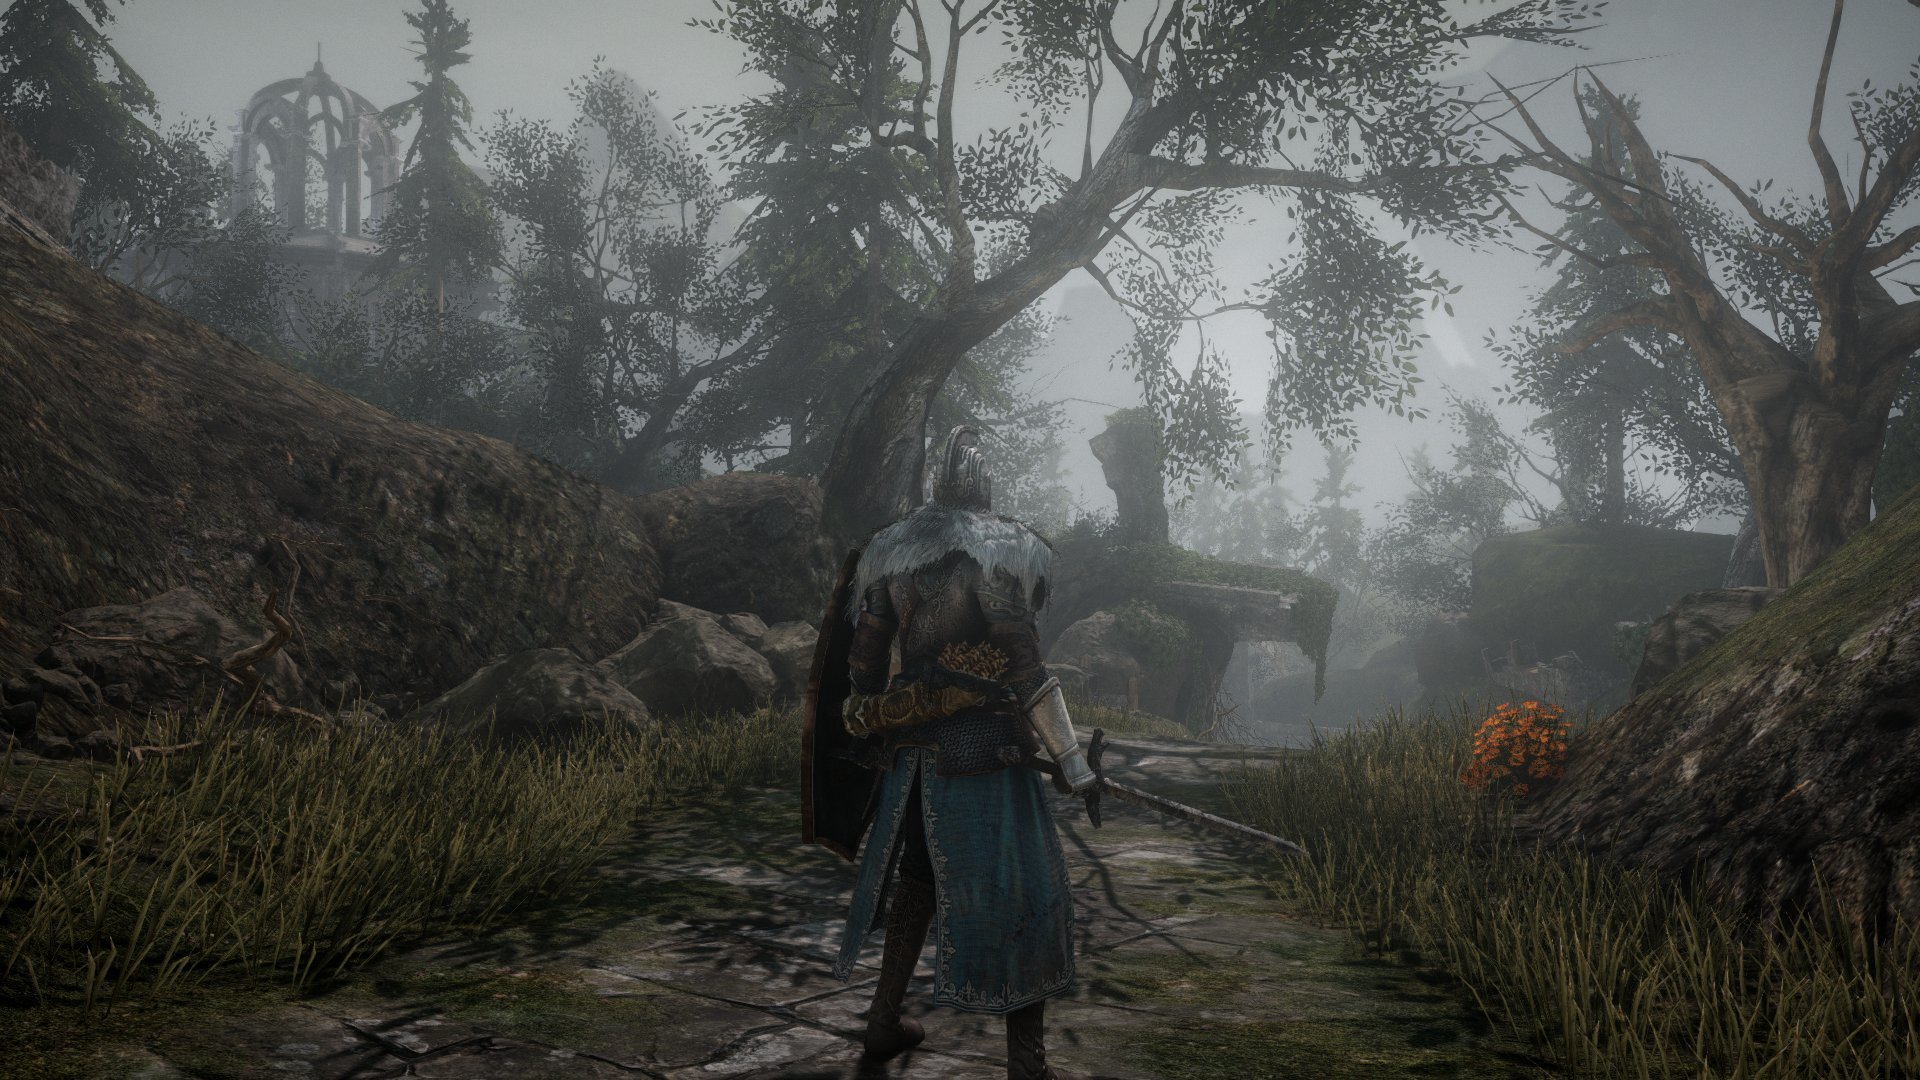 Dark Souls 2 Mod Dramatically Improves The Game's Lighting And